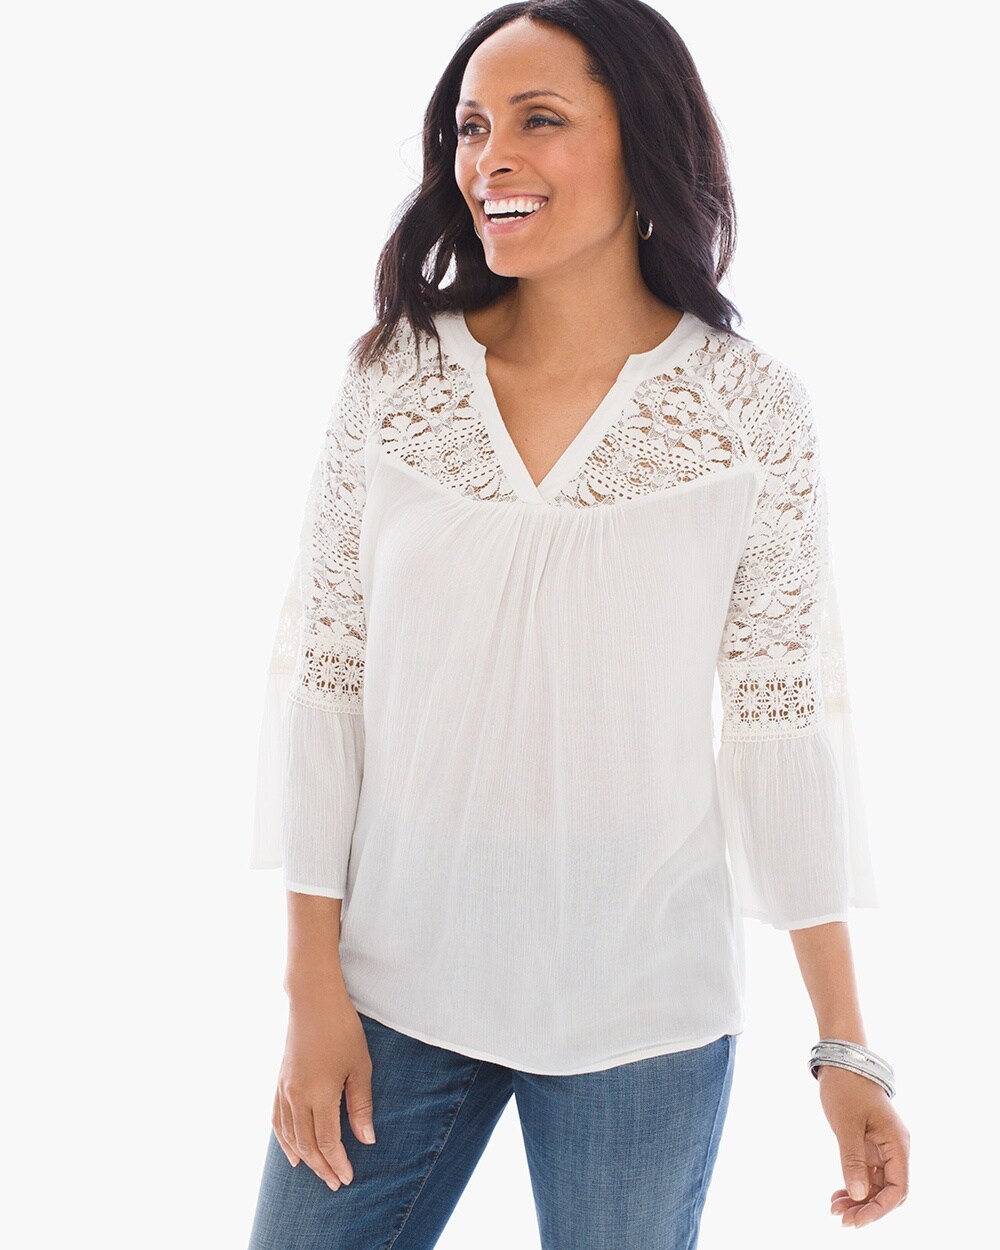 Lace Detail V-Neck Top - Chico's